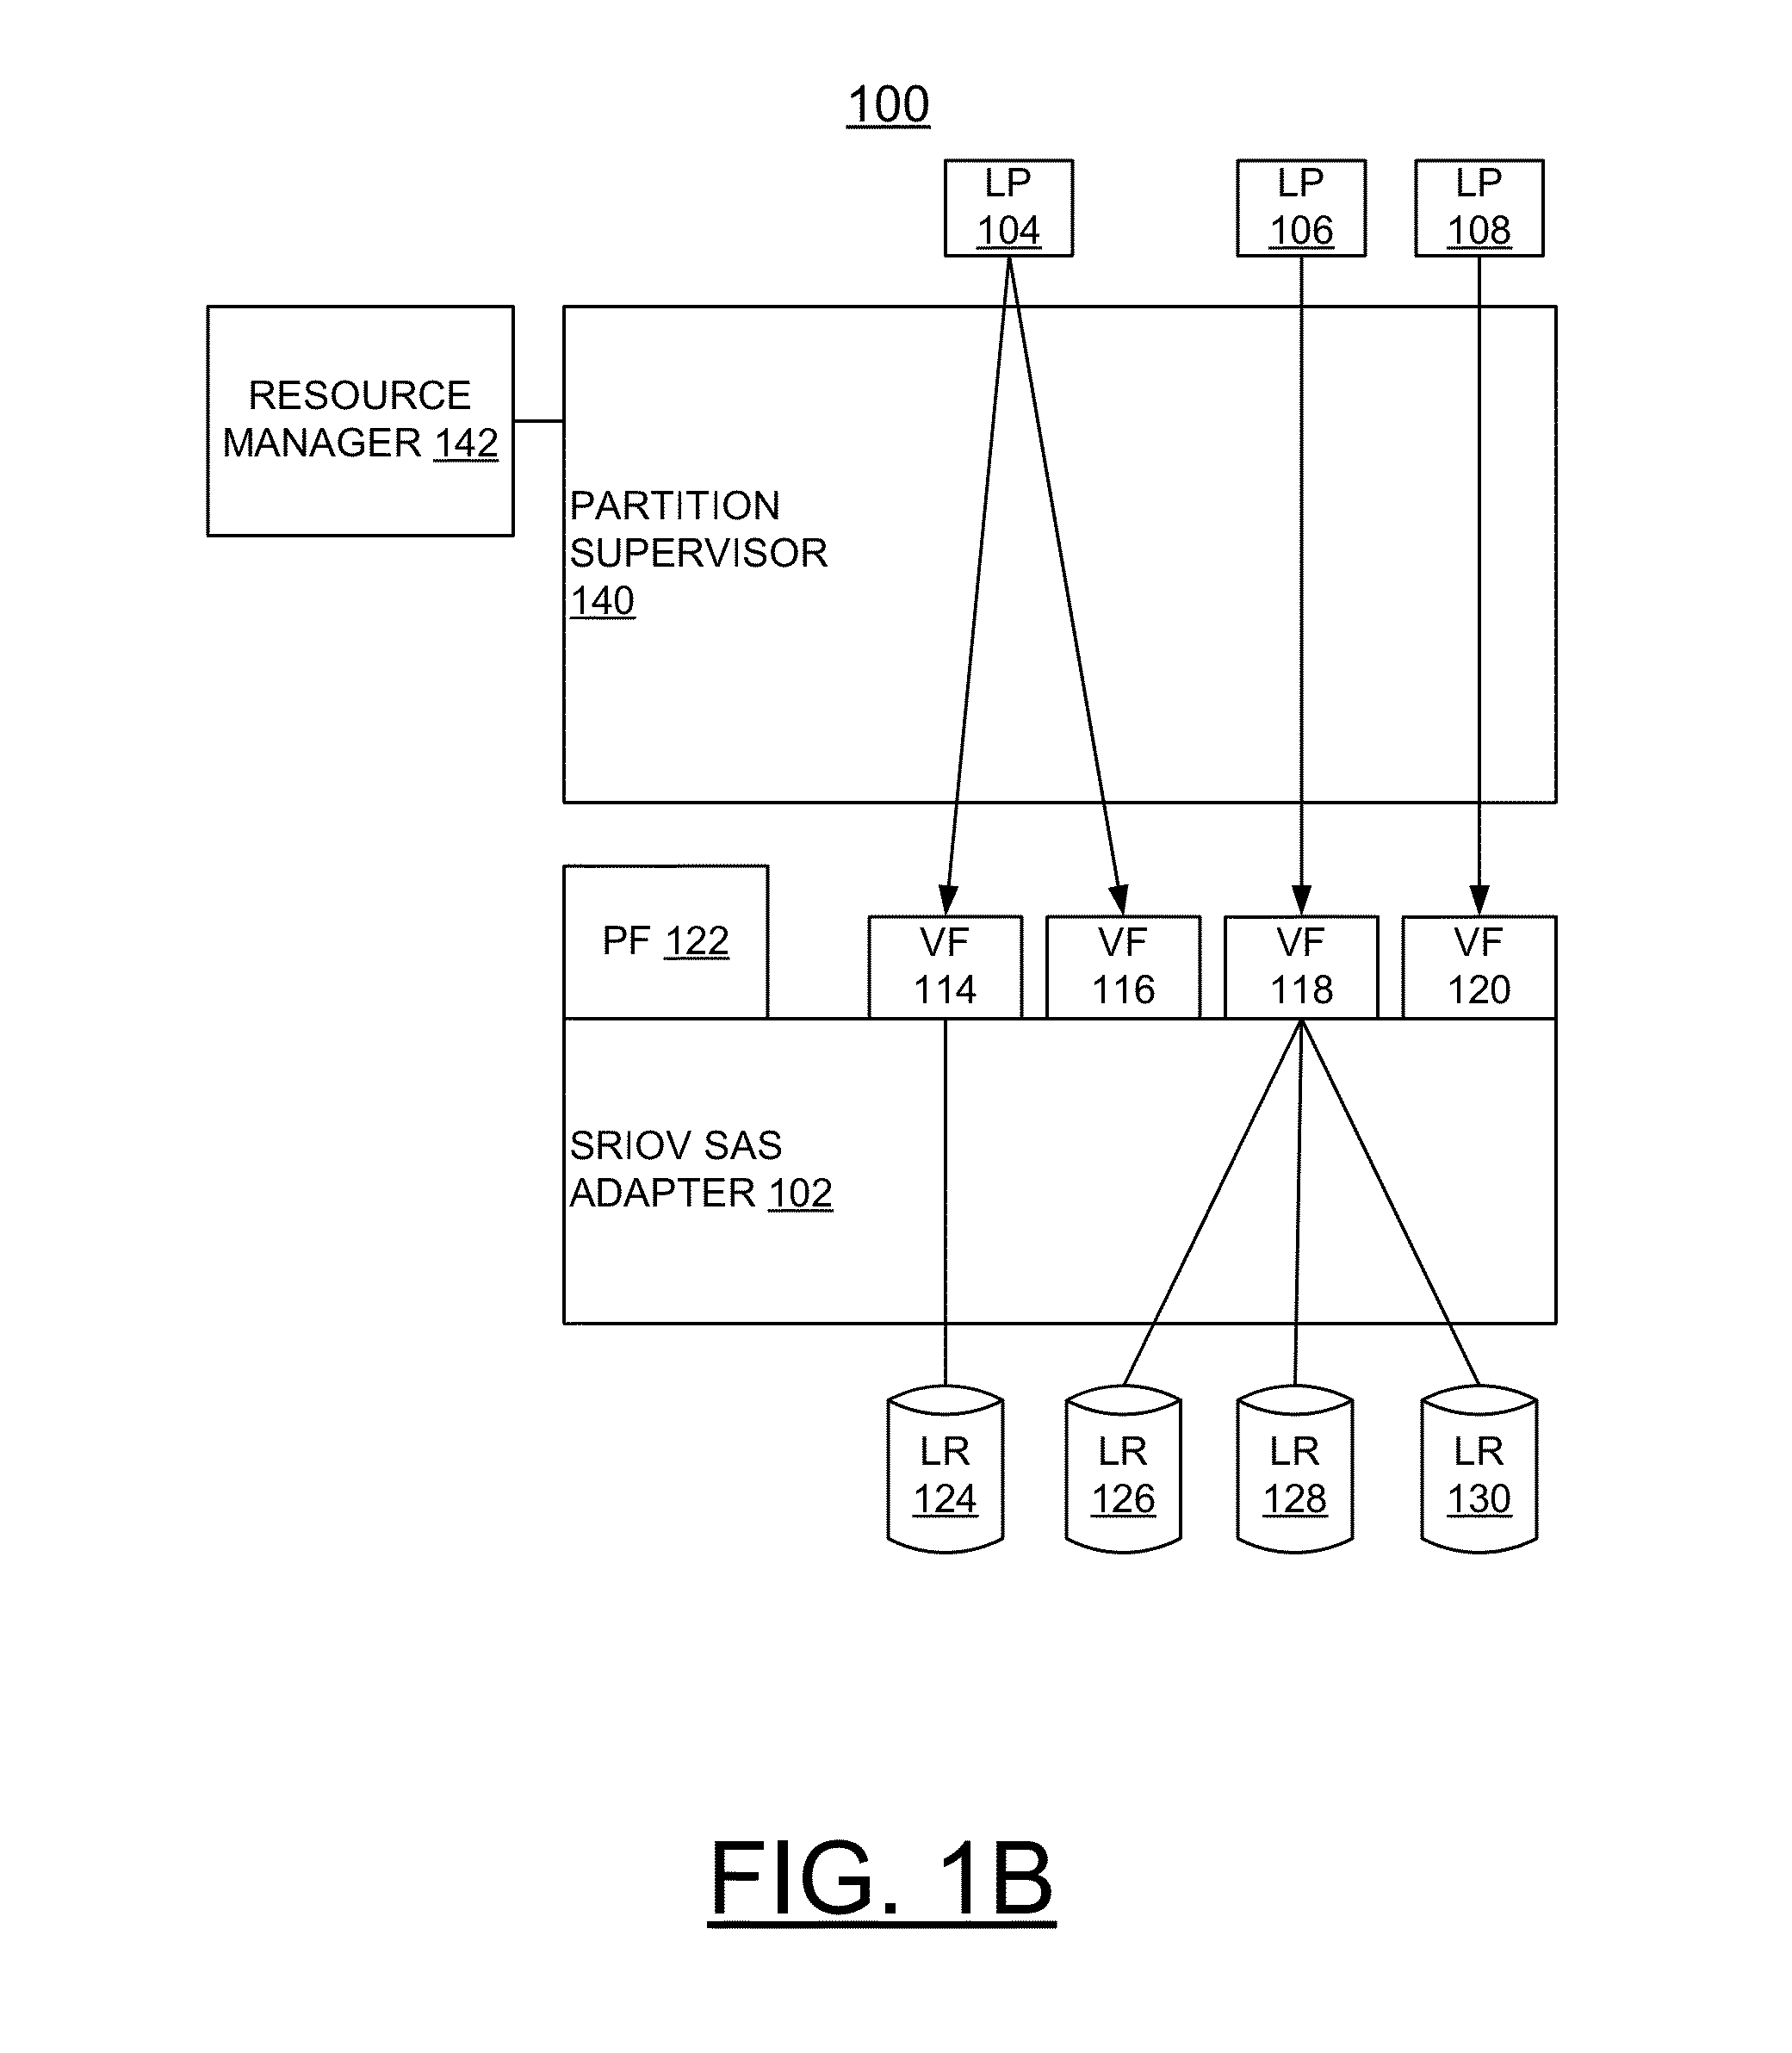 Implementing dynamic virtualization of an sriov capable sas adapter